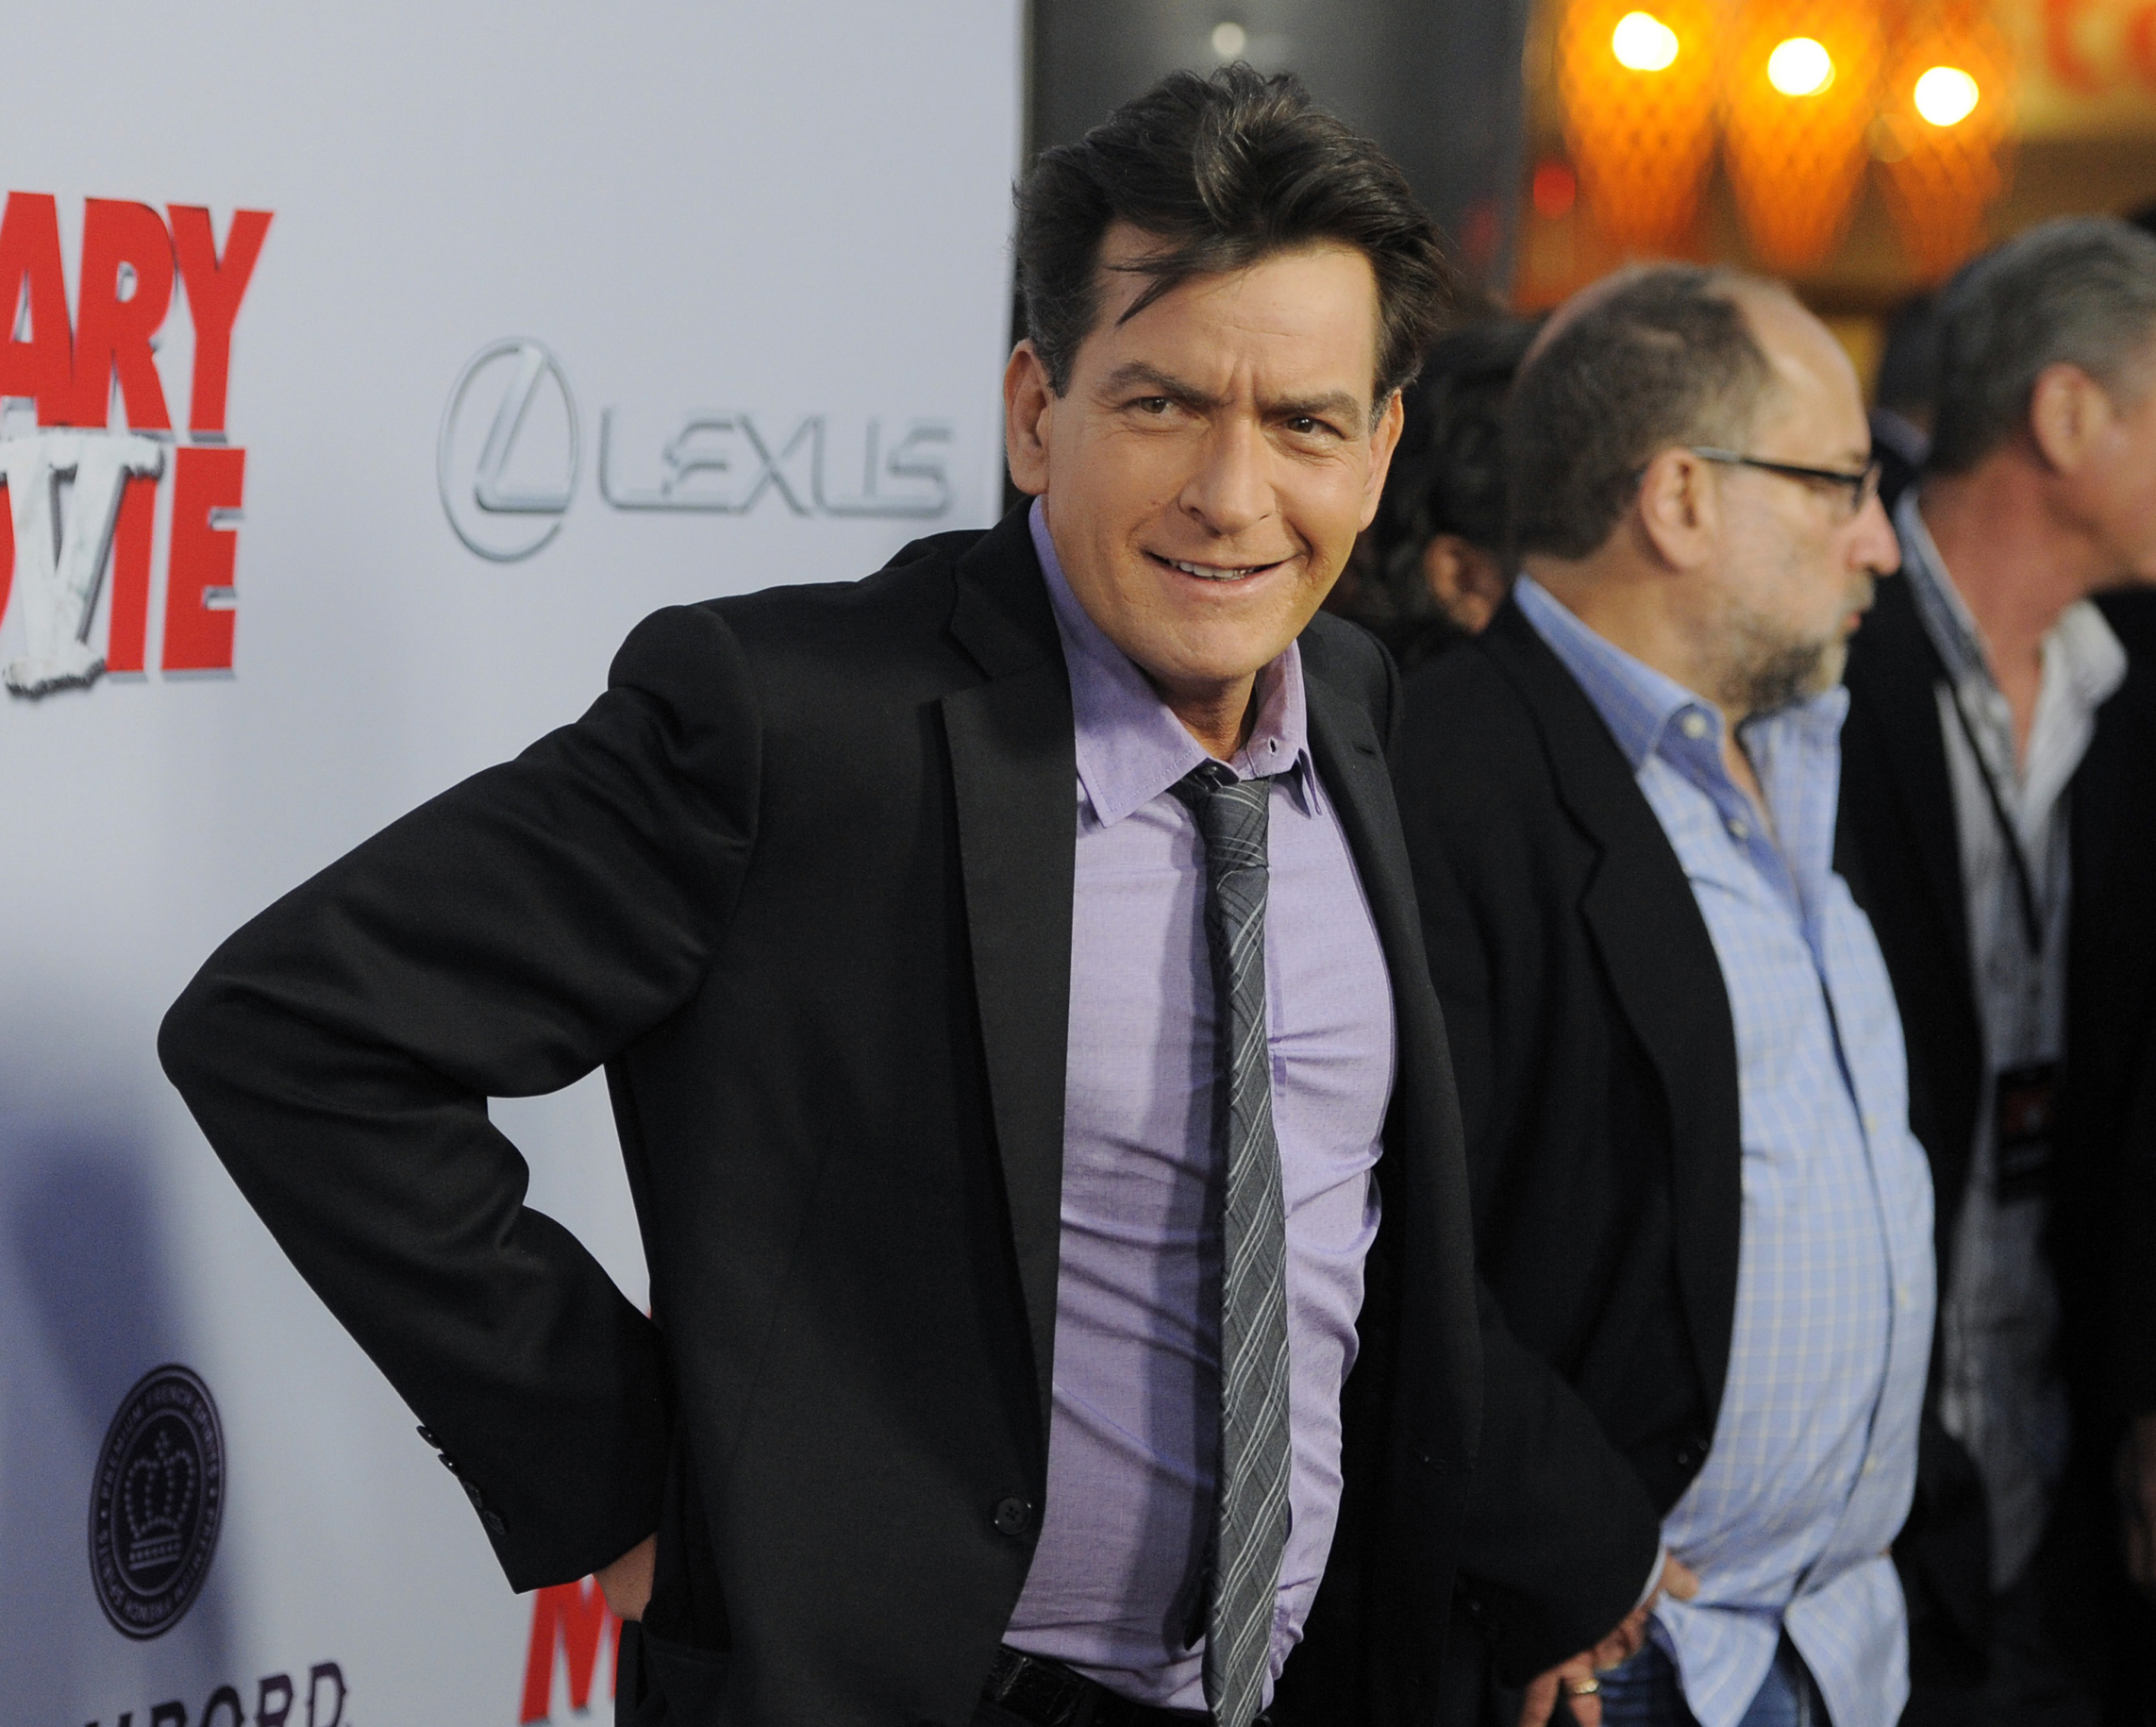 Actor Charlie Sheen, seen in a 2013 file photo, was reportedly attacked in his Malibu home this week, according to the Los Angeles Sheriff's Department. Sheen’s neighbor was arrested on a charge of assault with a deadly weapon, according to the department.